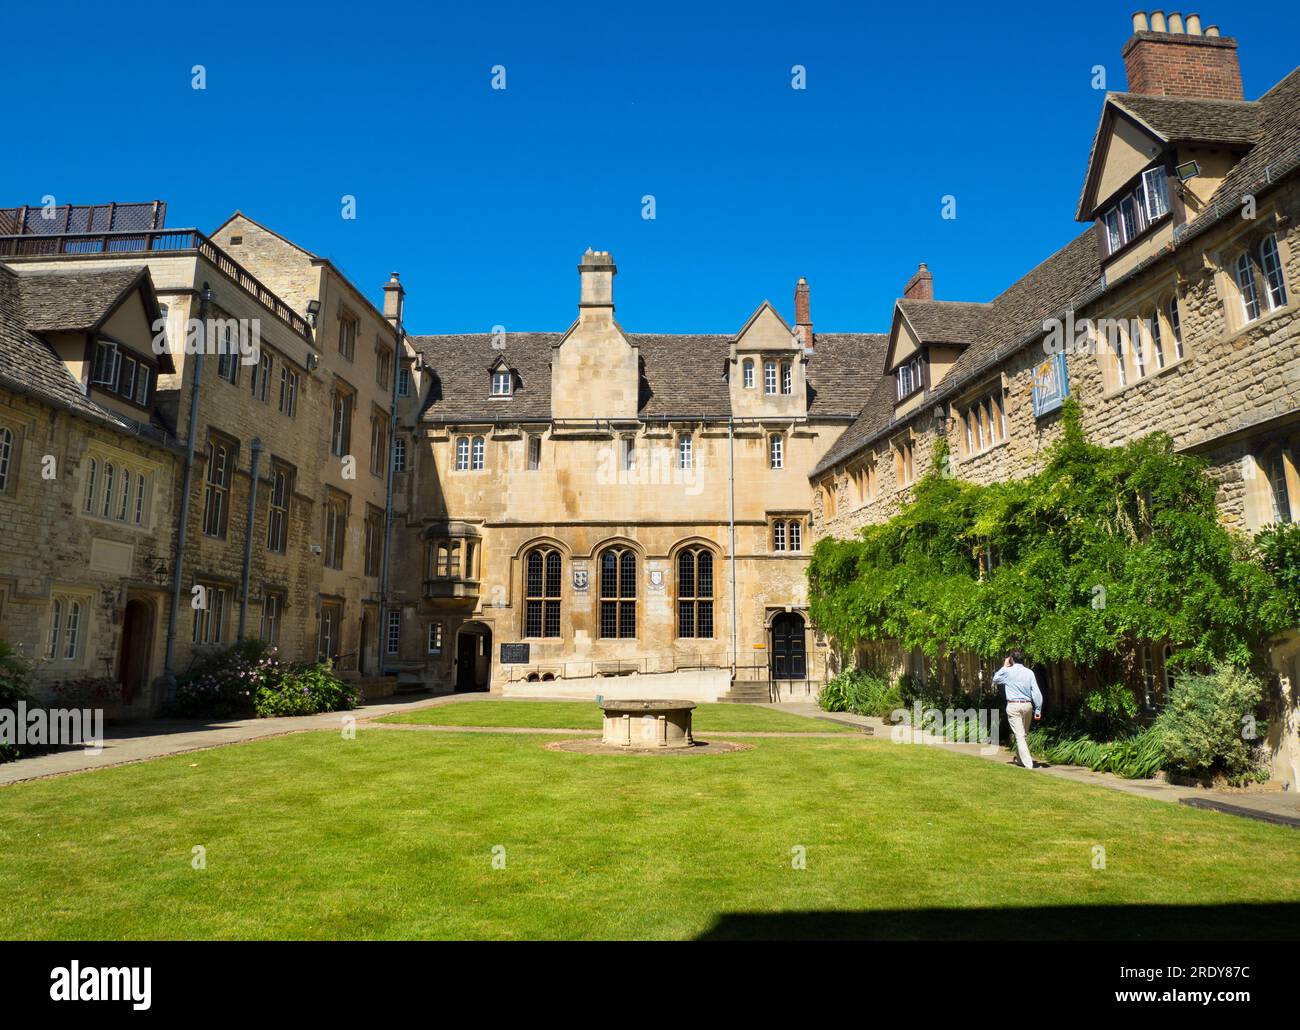 Probably established around 1236 CE, St Edmund Hall  - often known informally as Teddy Hall - claims to be the oldest surviving academic society to ho Stock Photo